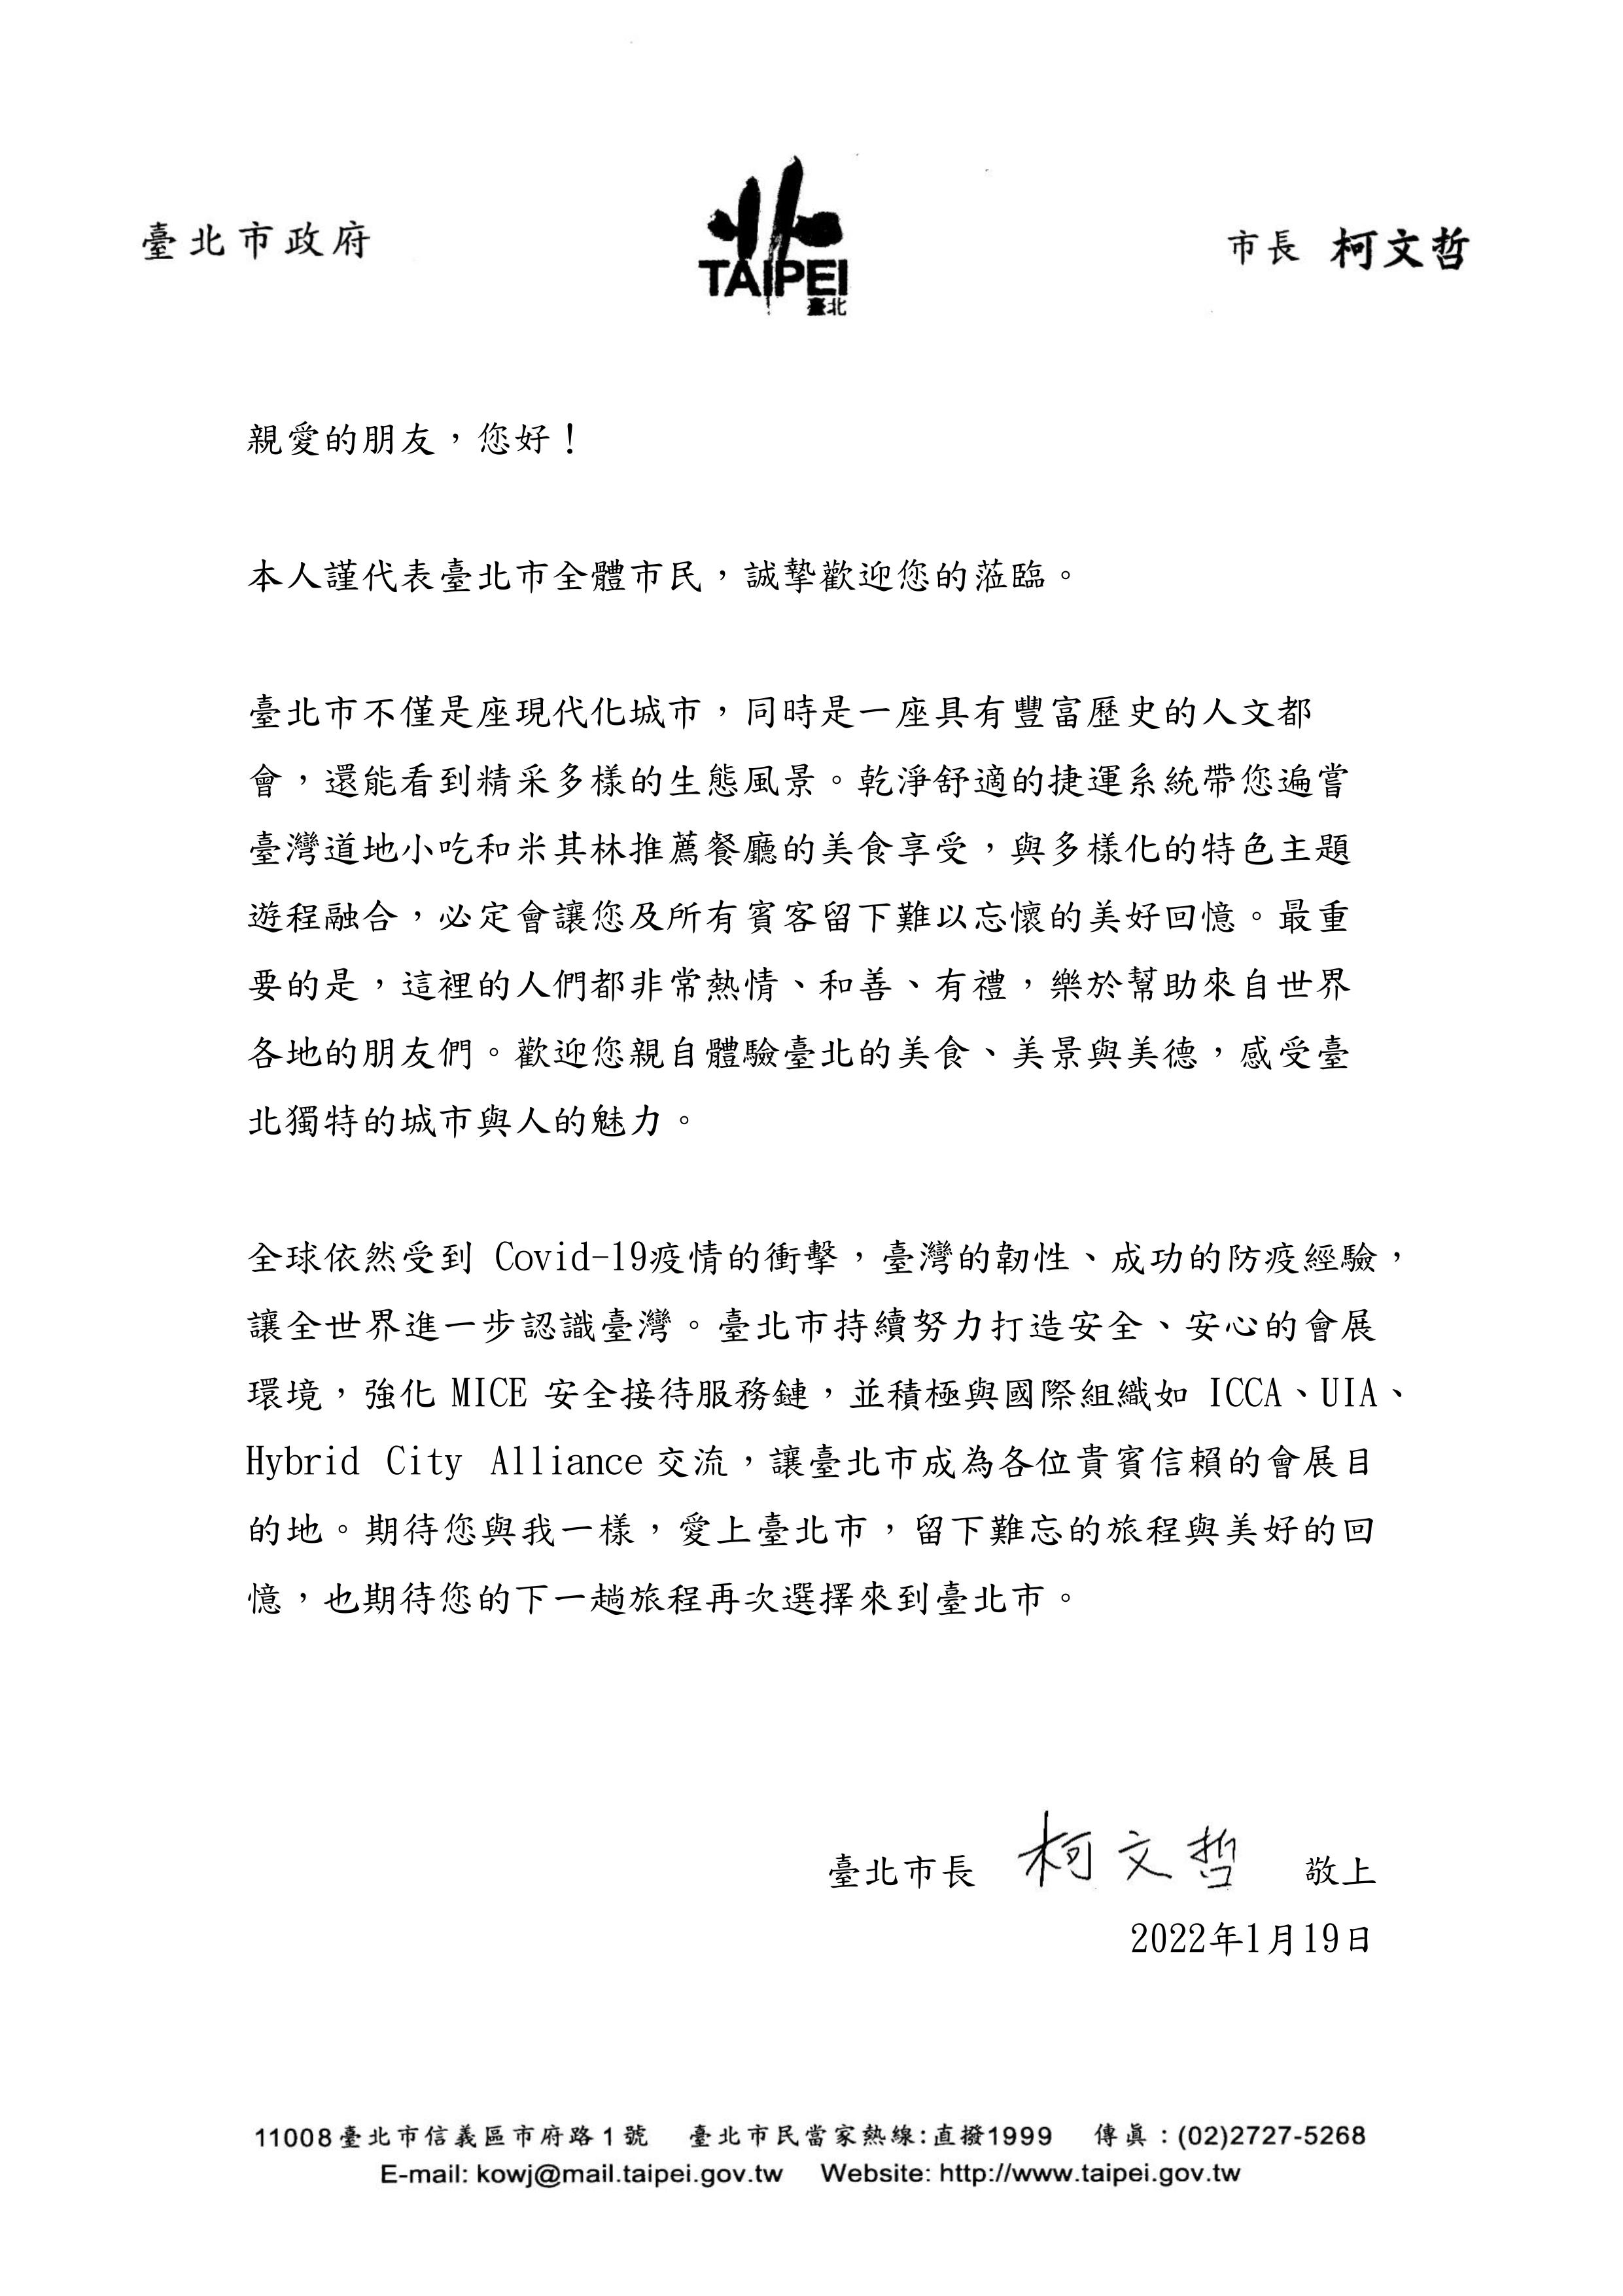 The Chinese letter